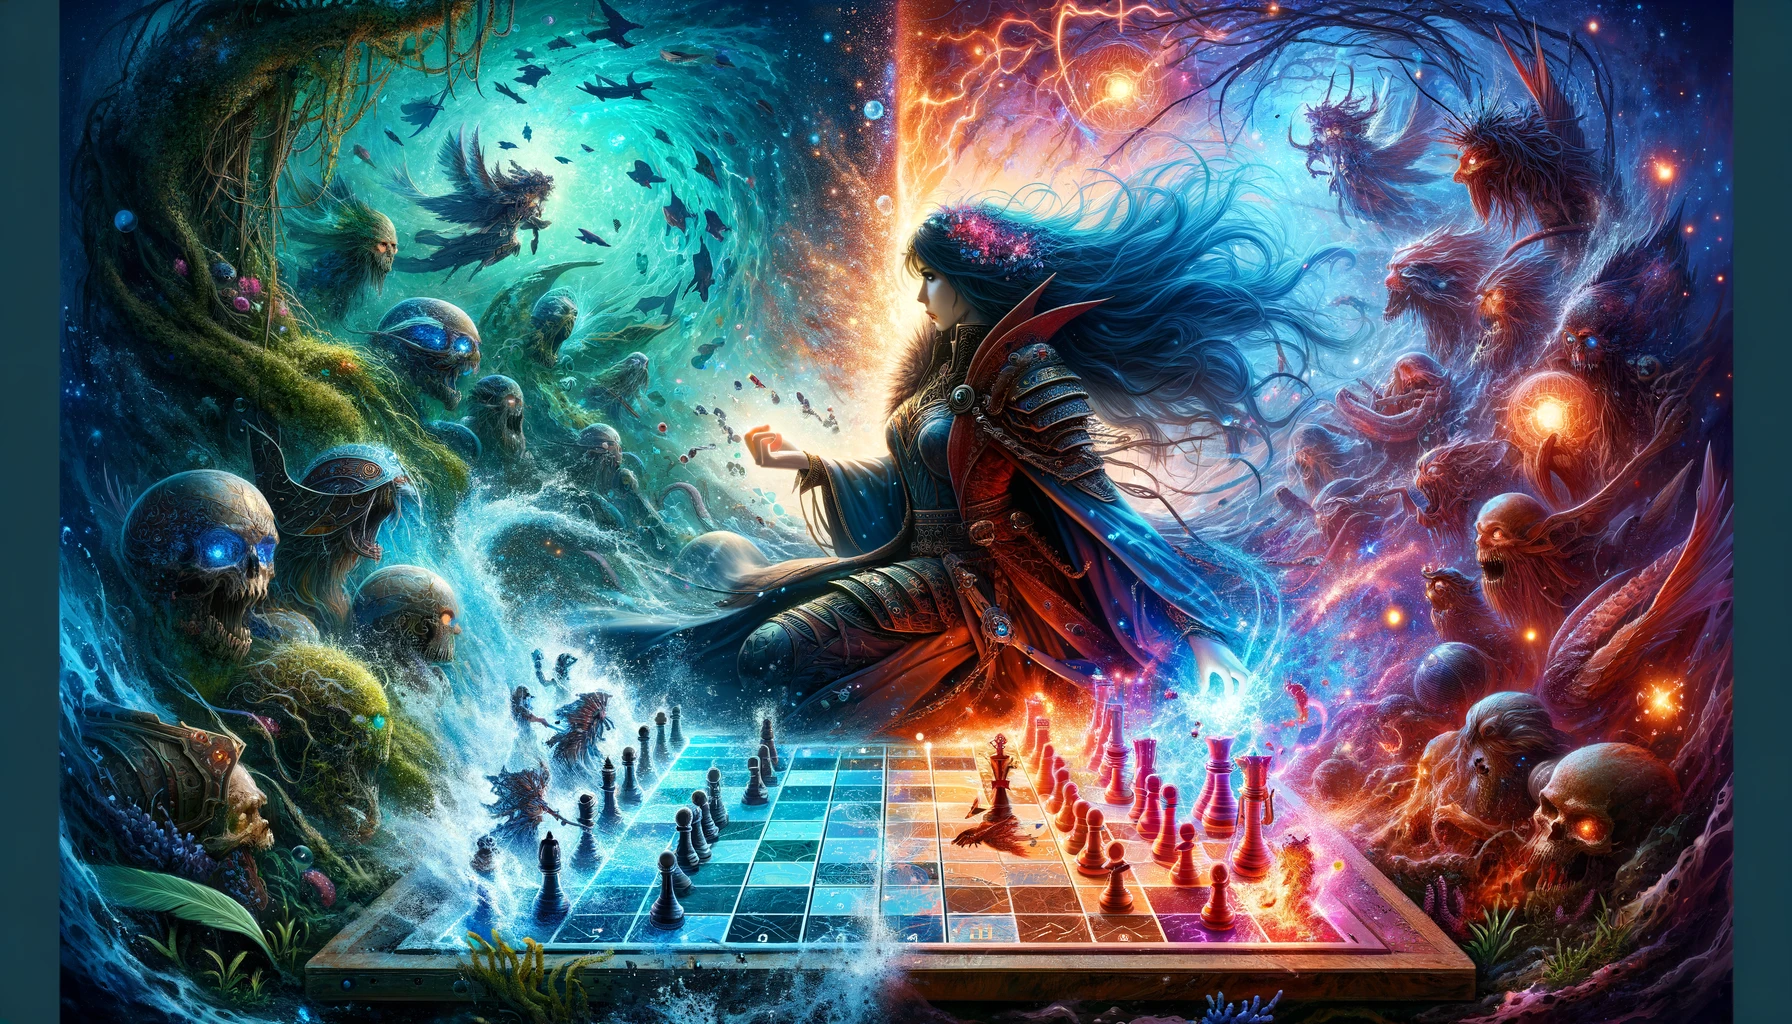 A warrior woman in an underwater setting plans her strategic moves in a Marvel Snap-like game scenario, surrounded by mystical energy and vivid marine life, merging strategic thought with fantastical elements.